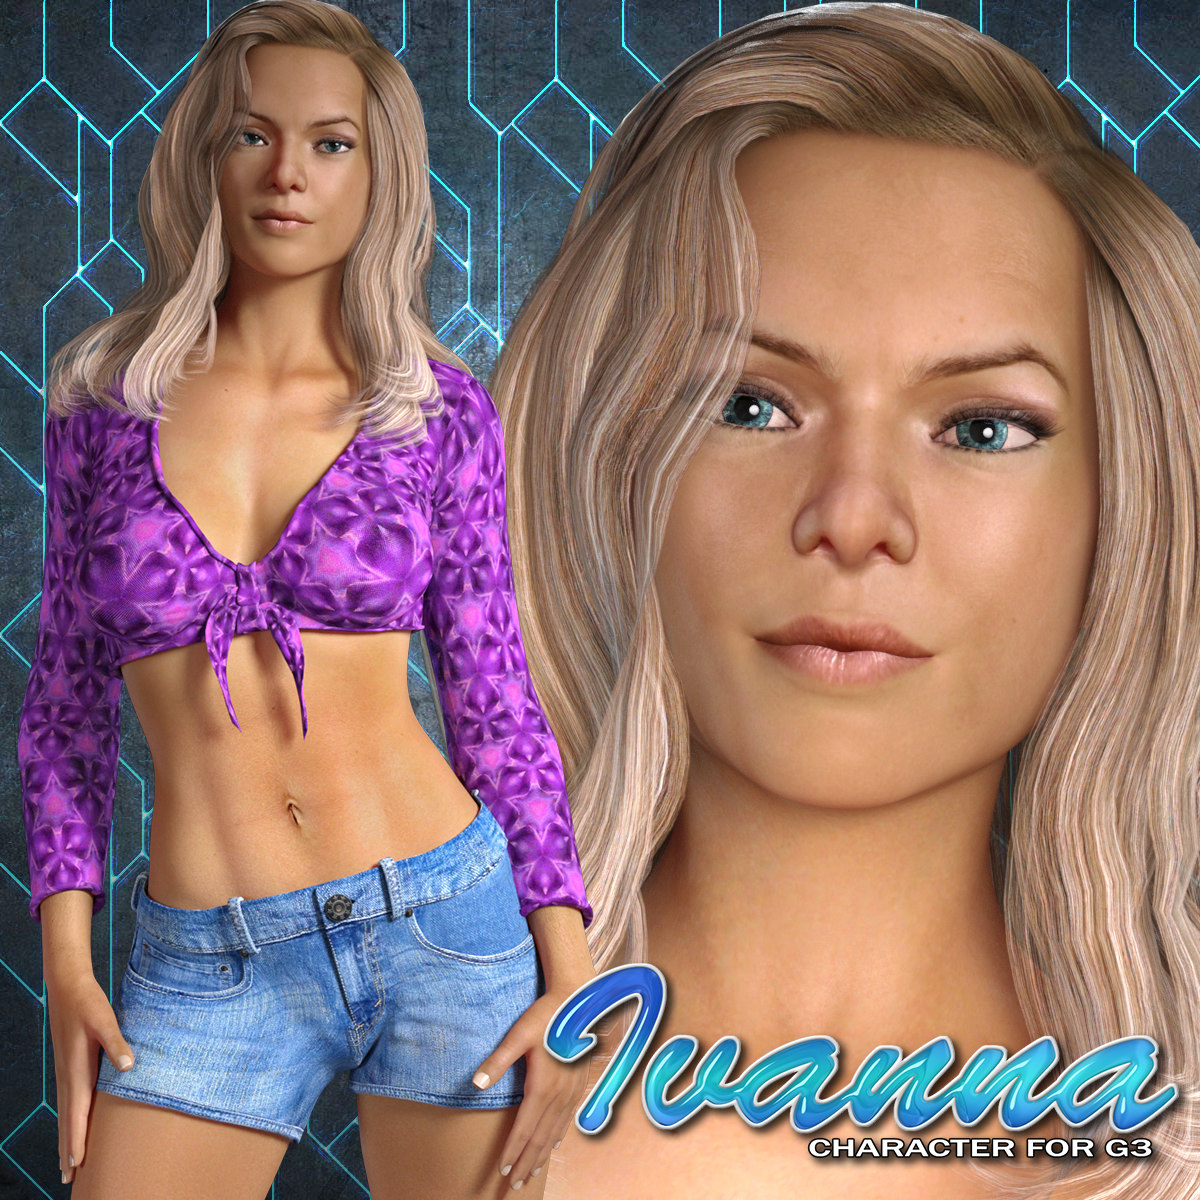 Exnem Ivanna Character for G3 Female